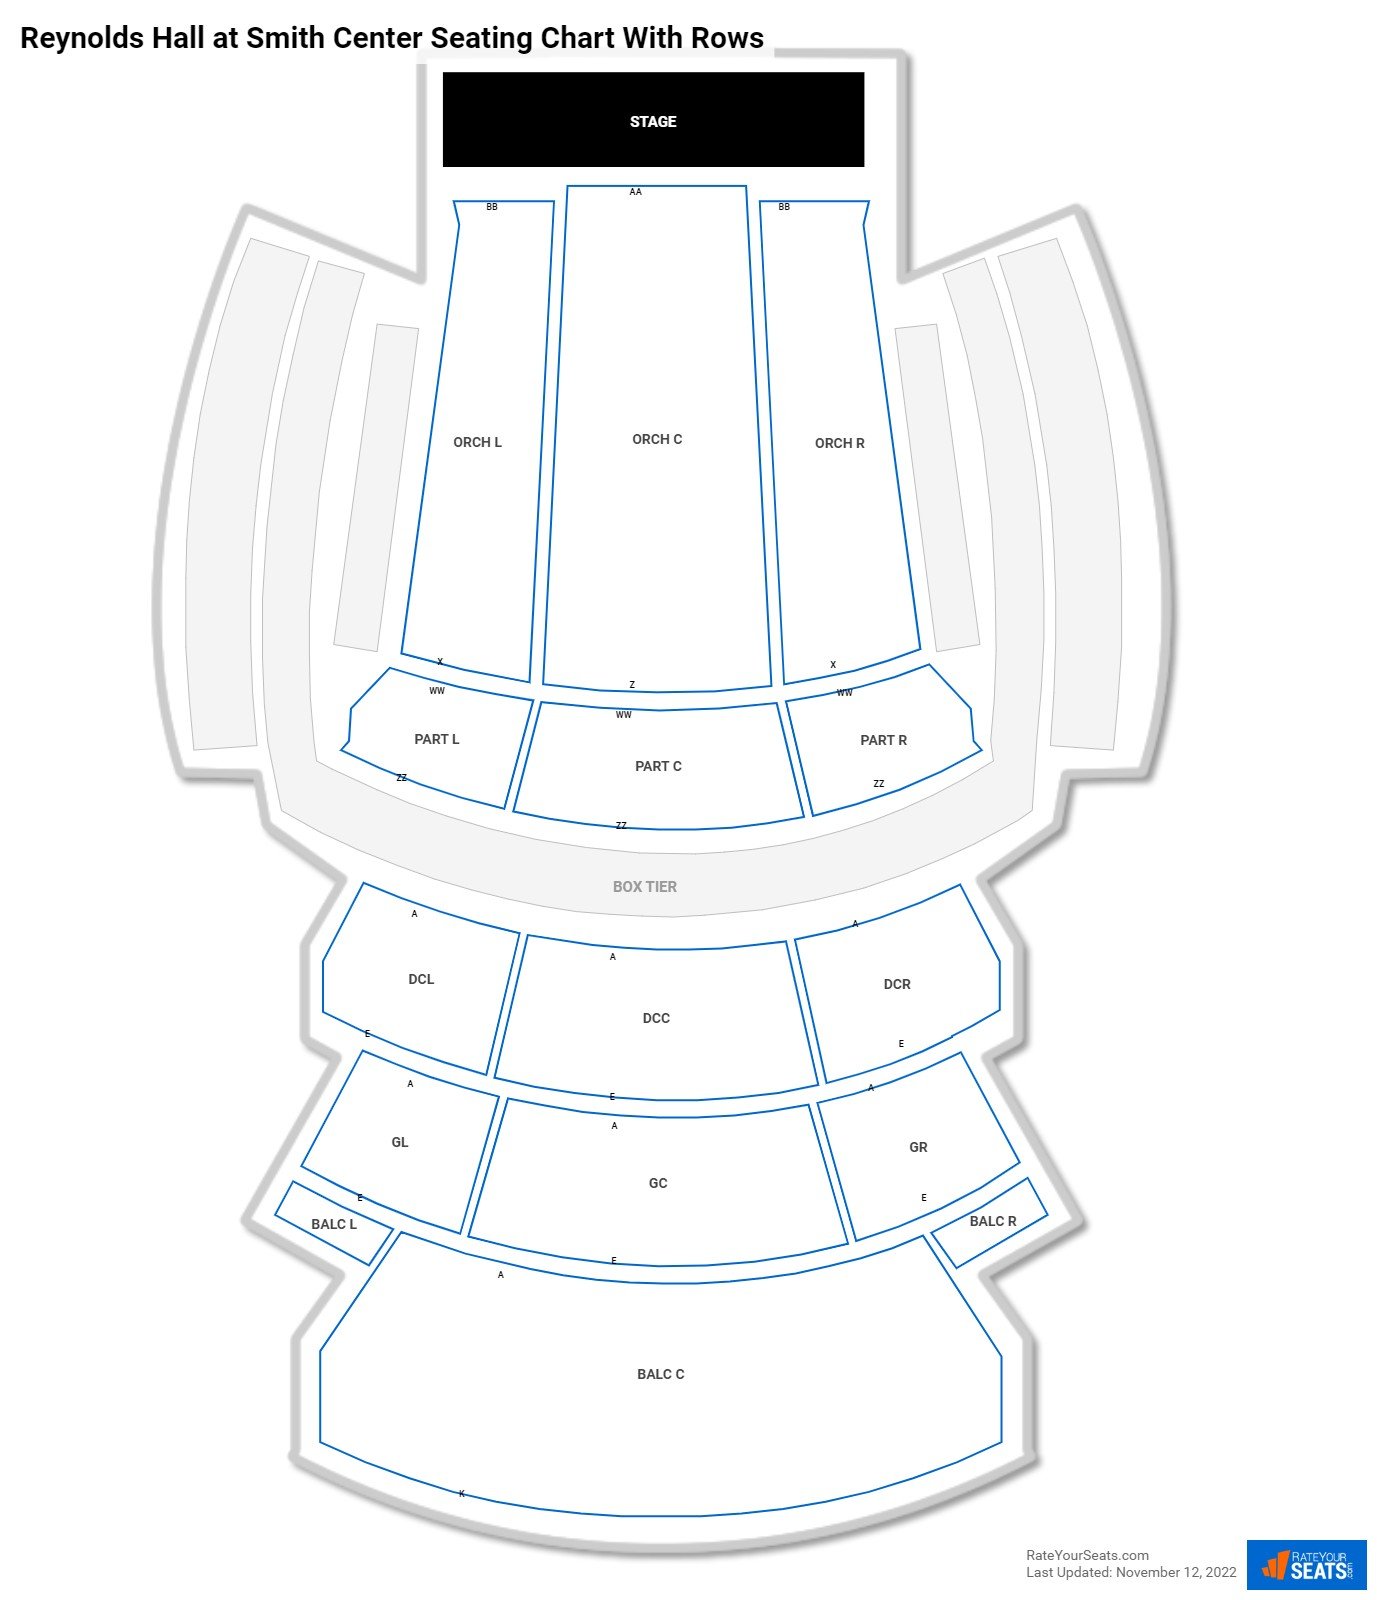 Reynolds Hall at Smith Center seating chart with row numbers